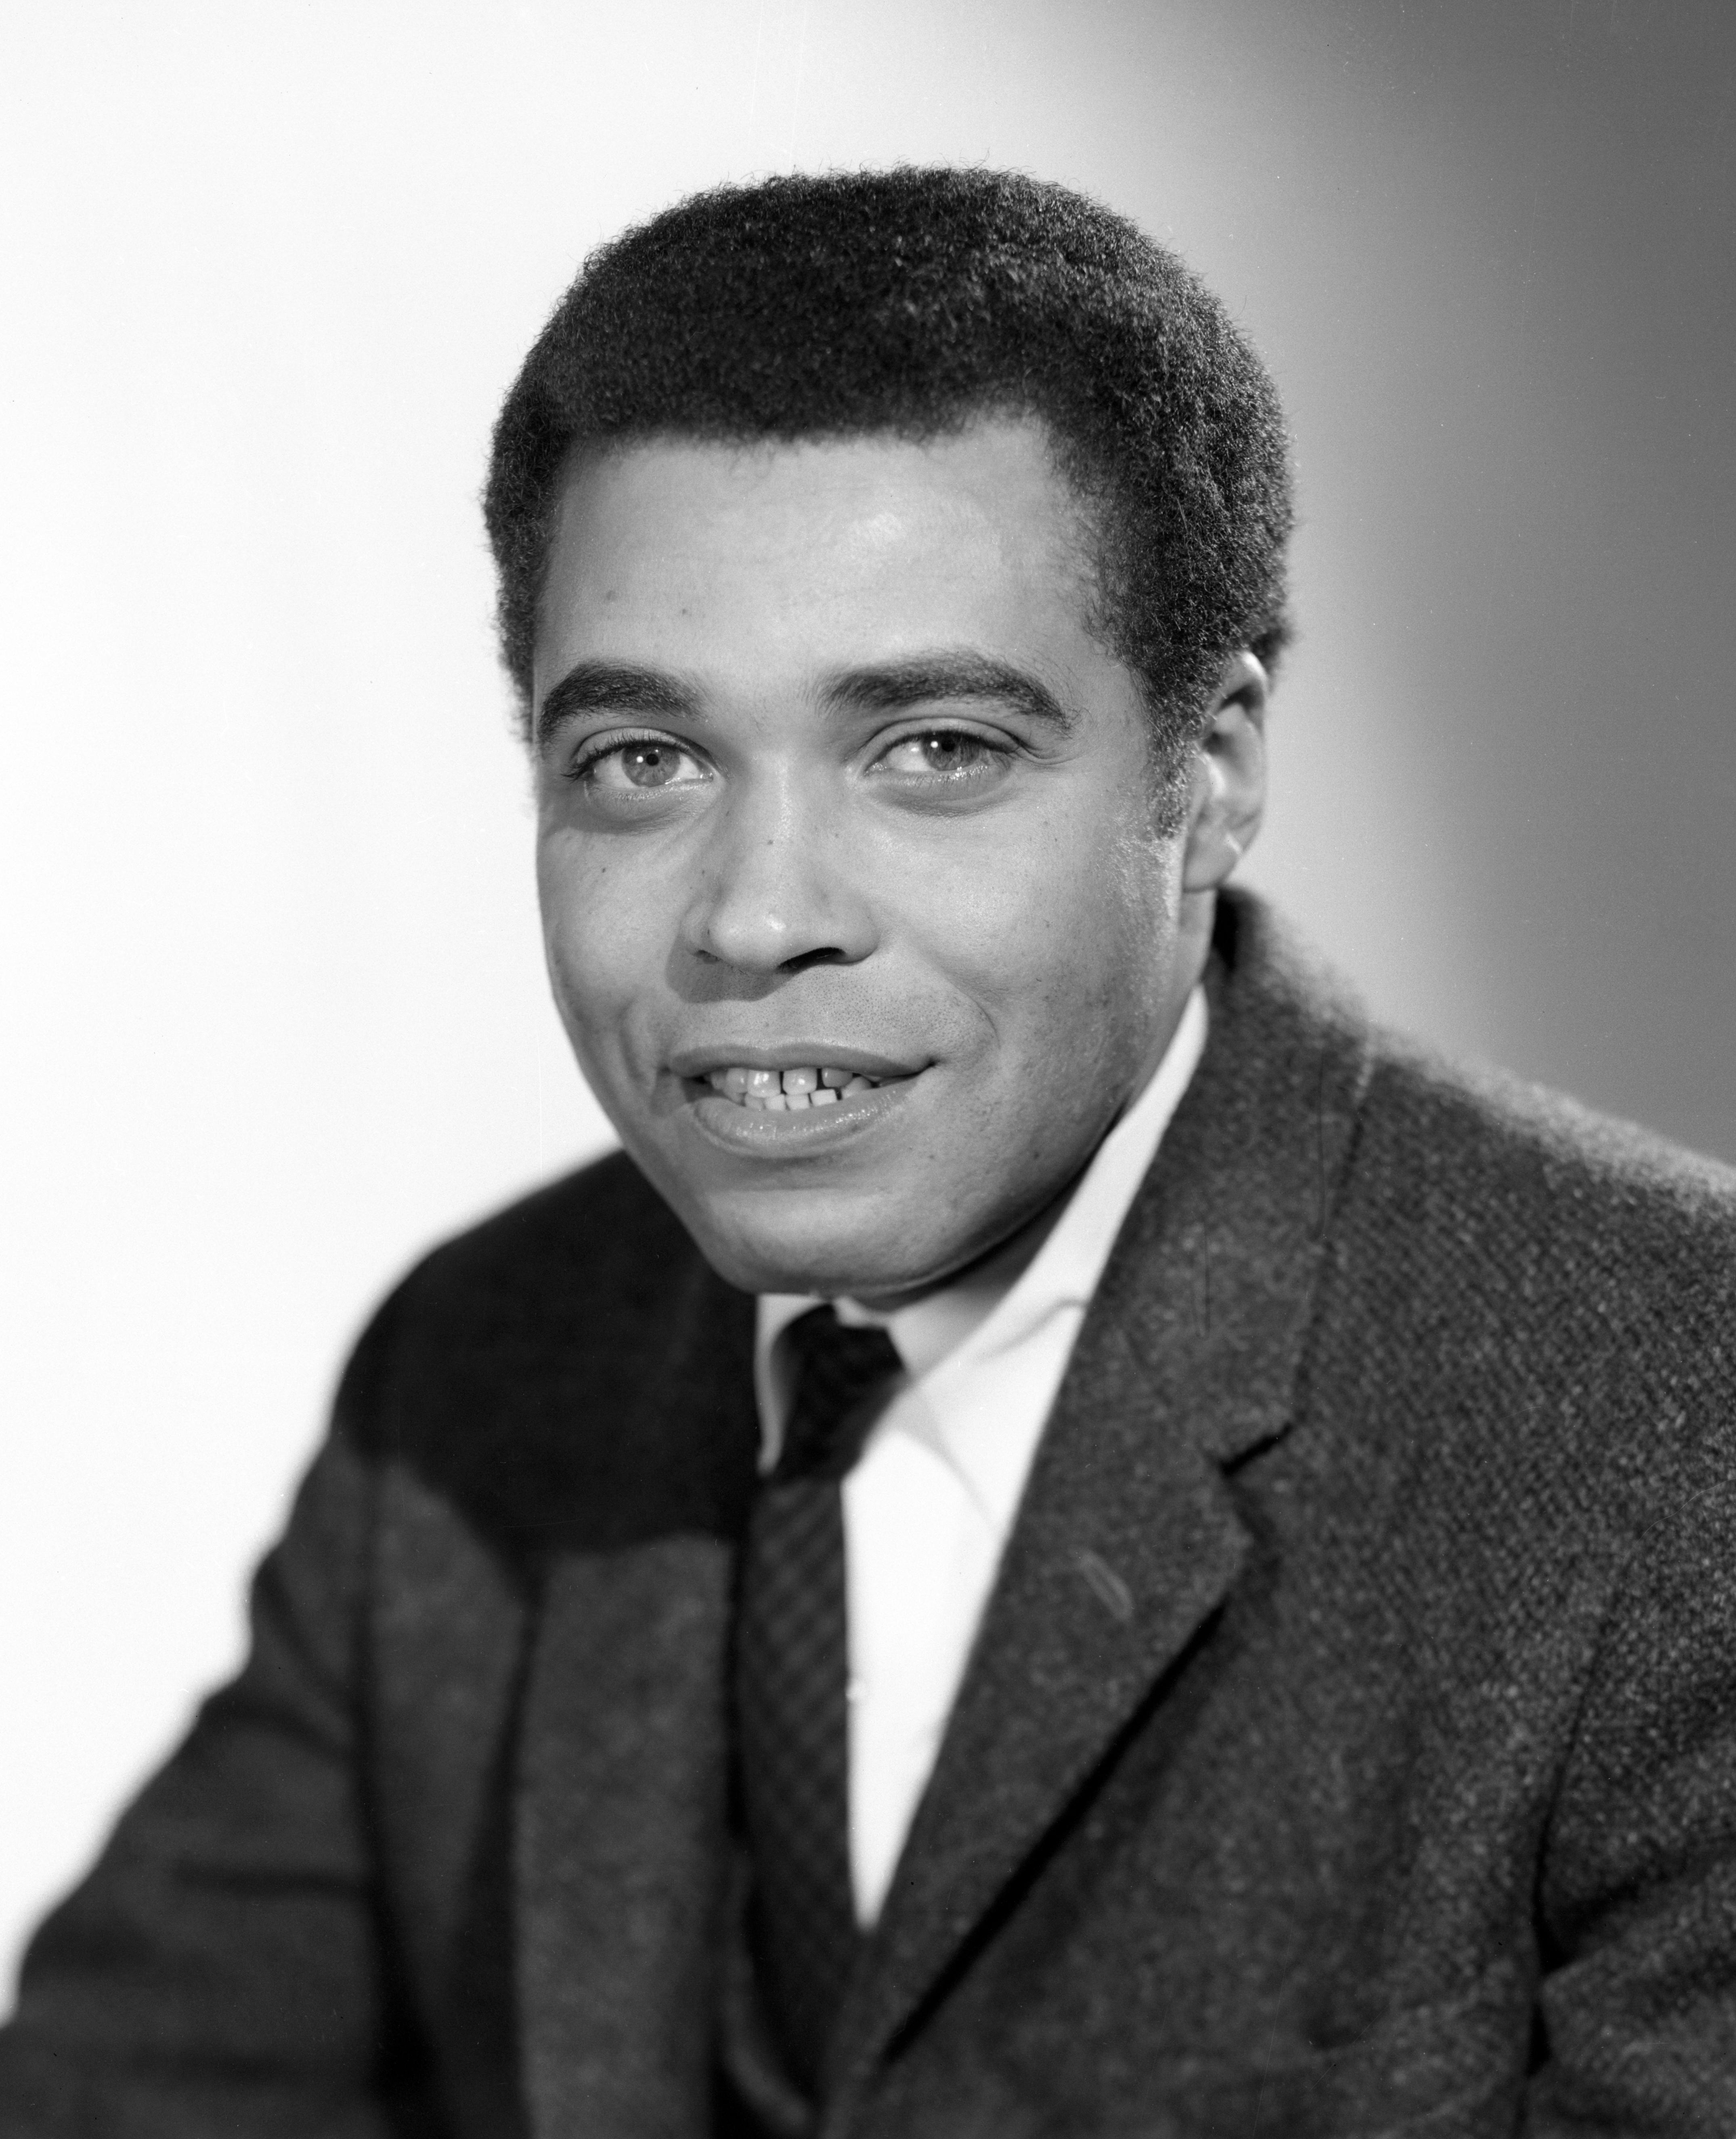 James Earl Jones as Dr. Jerry Turner in the daytime drama "As the World Turns" in New York, dated December 2, 1965. | Source: Getty Images